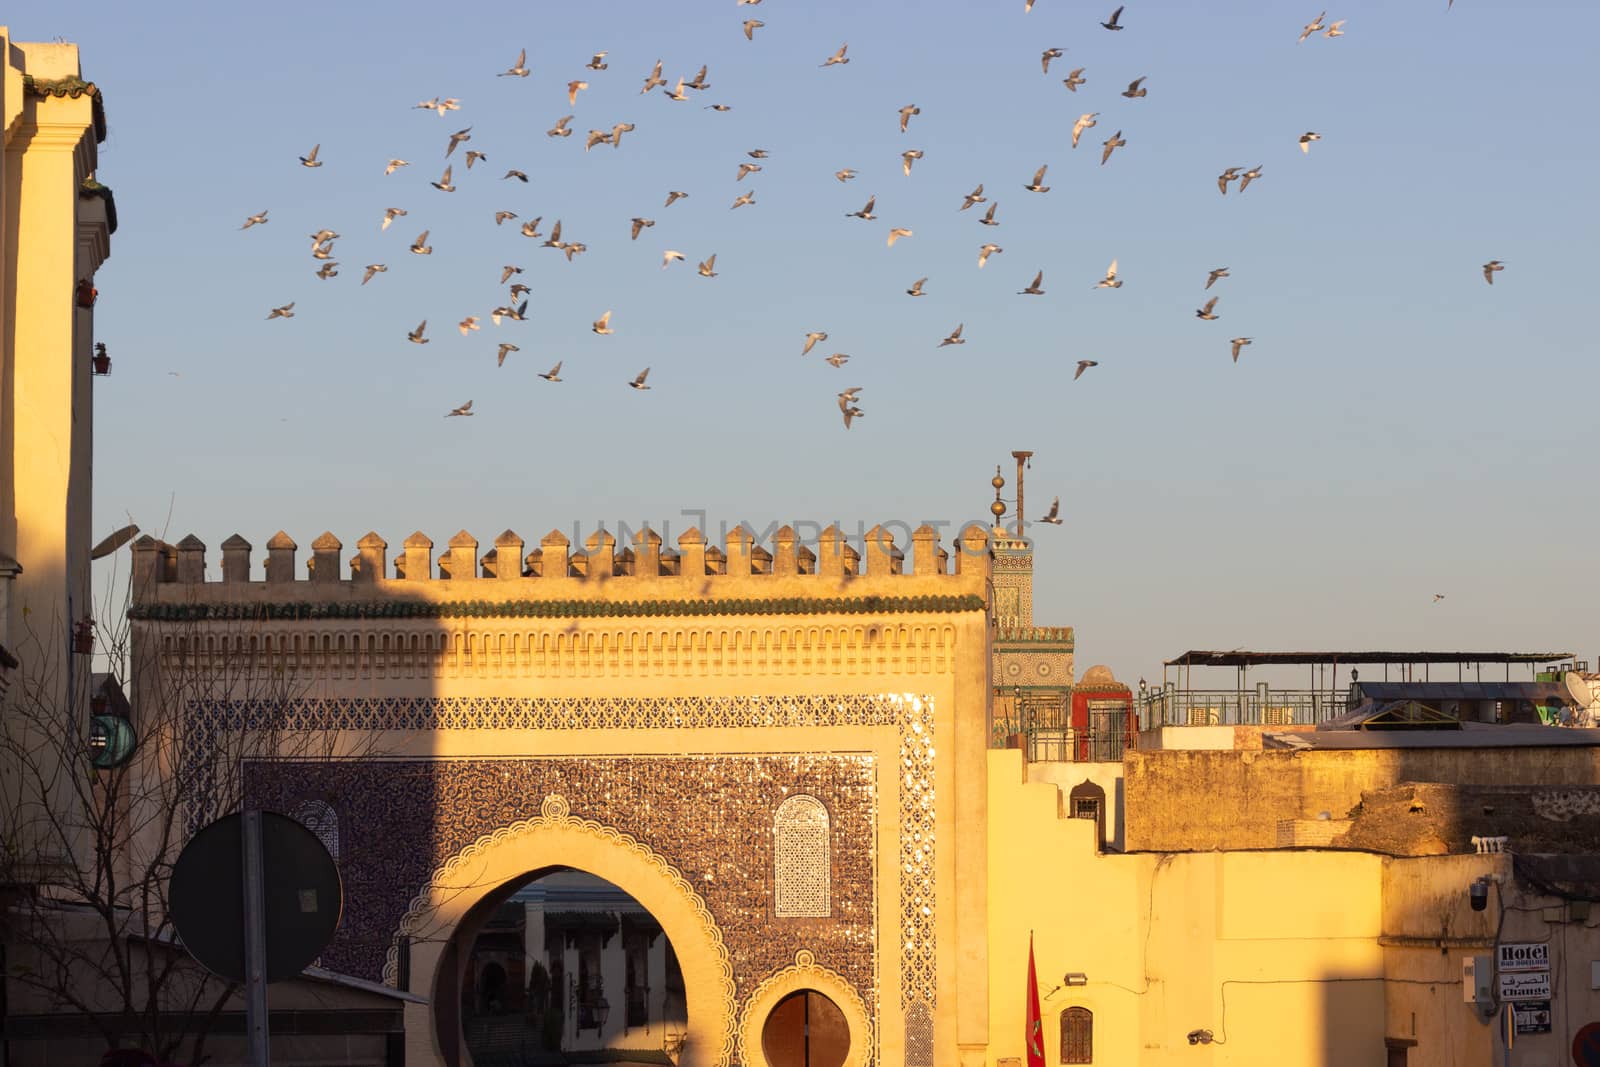 Bab Bou Jeloud gate (Blue Gate) - Fez, Morocco sunset with pigeons flying above against a warm blue sky.. High quality photo